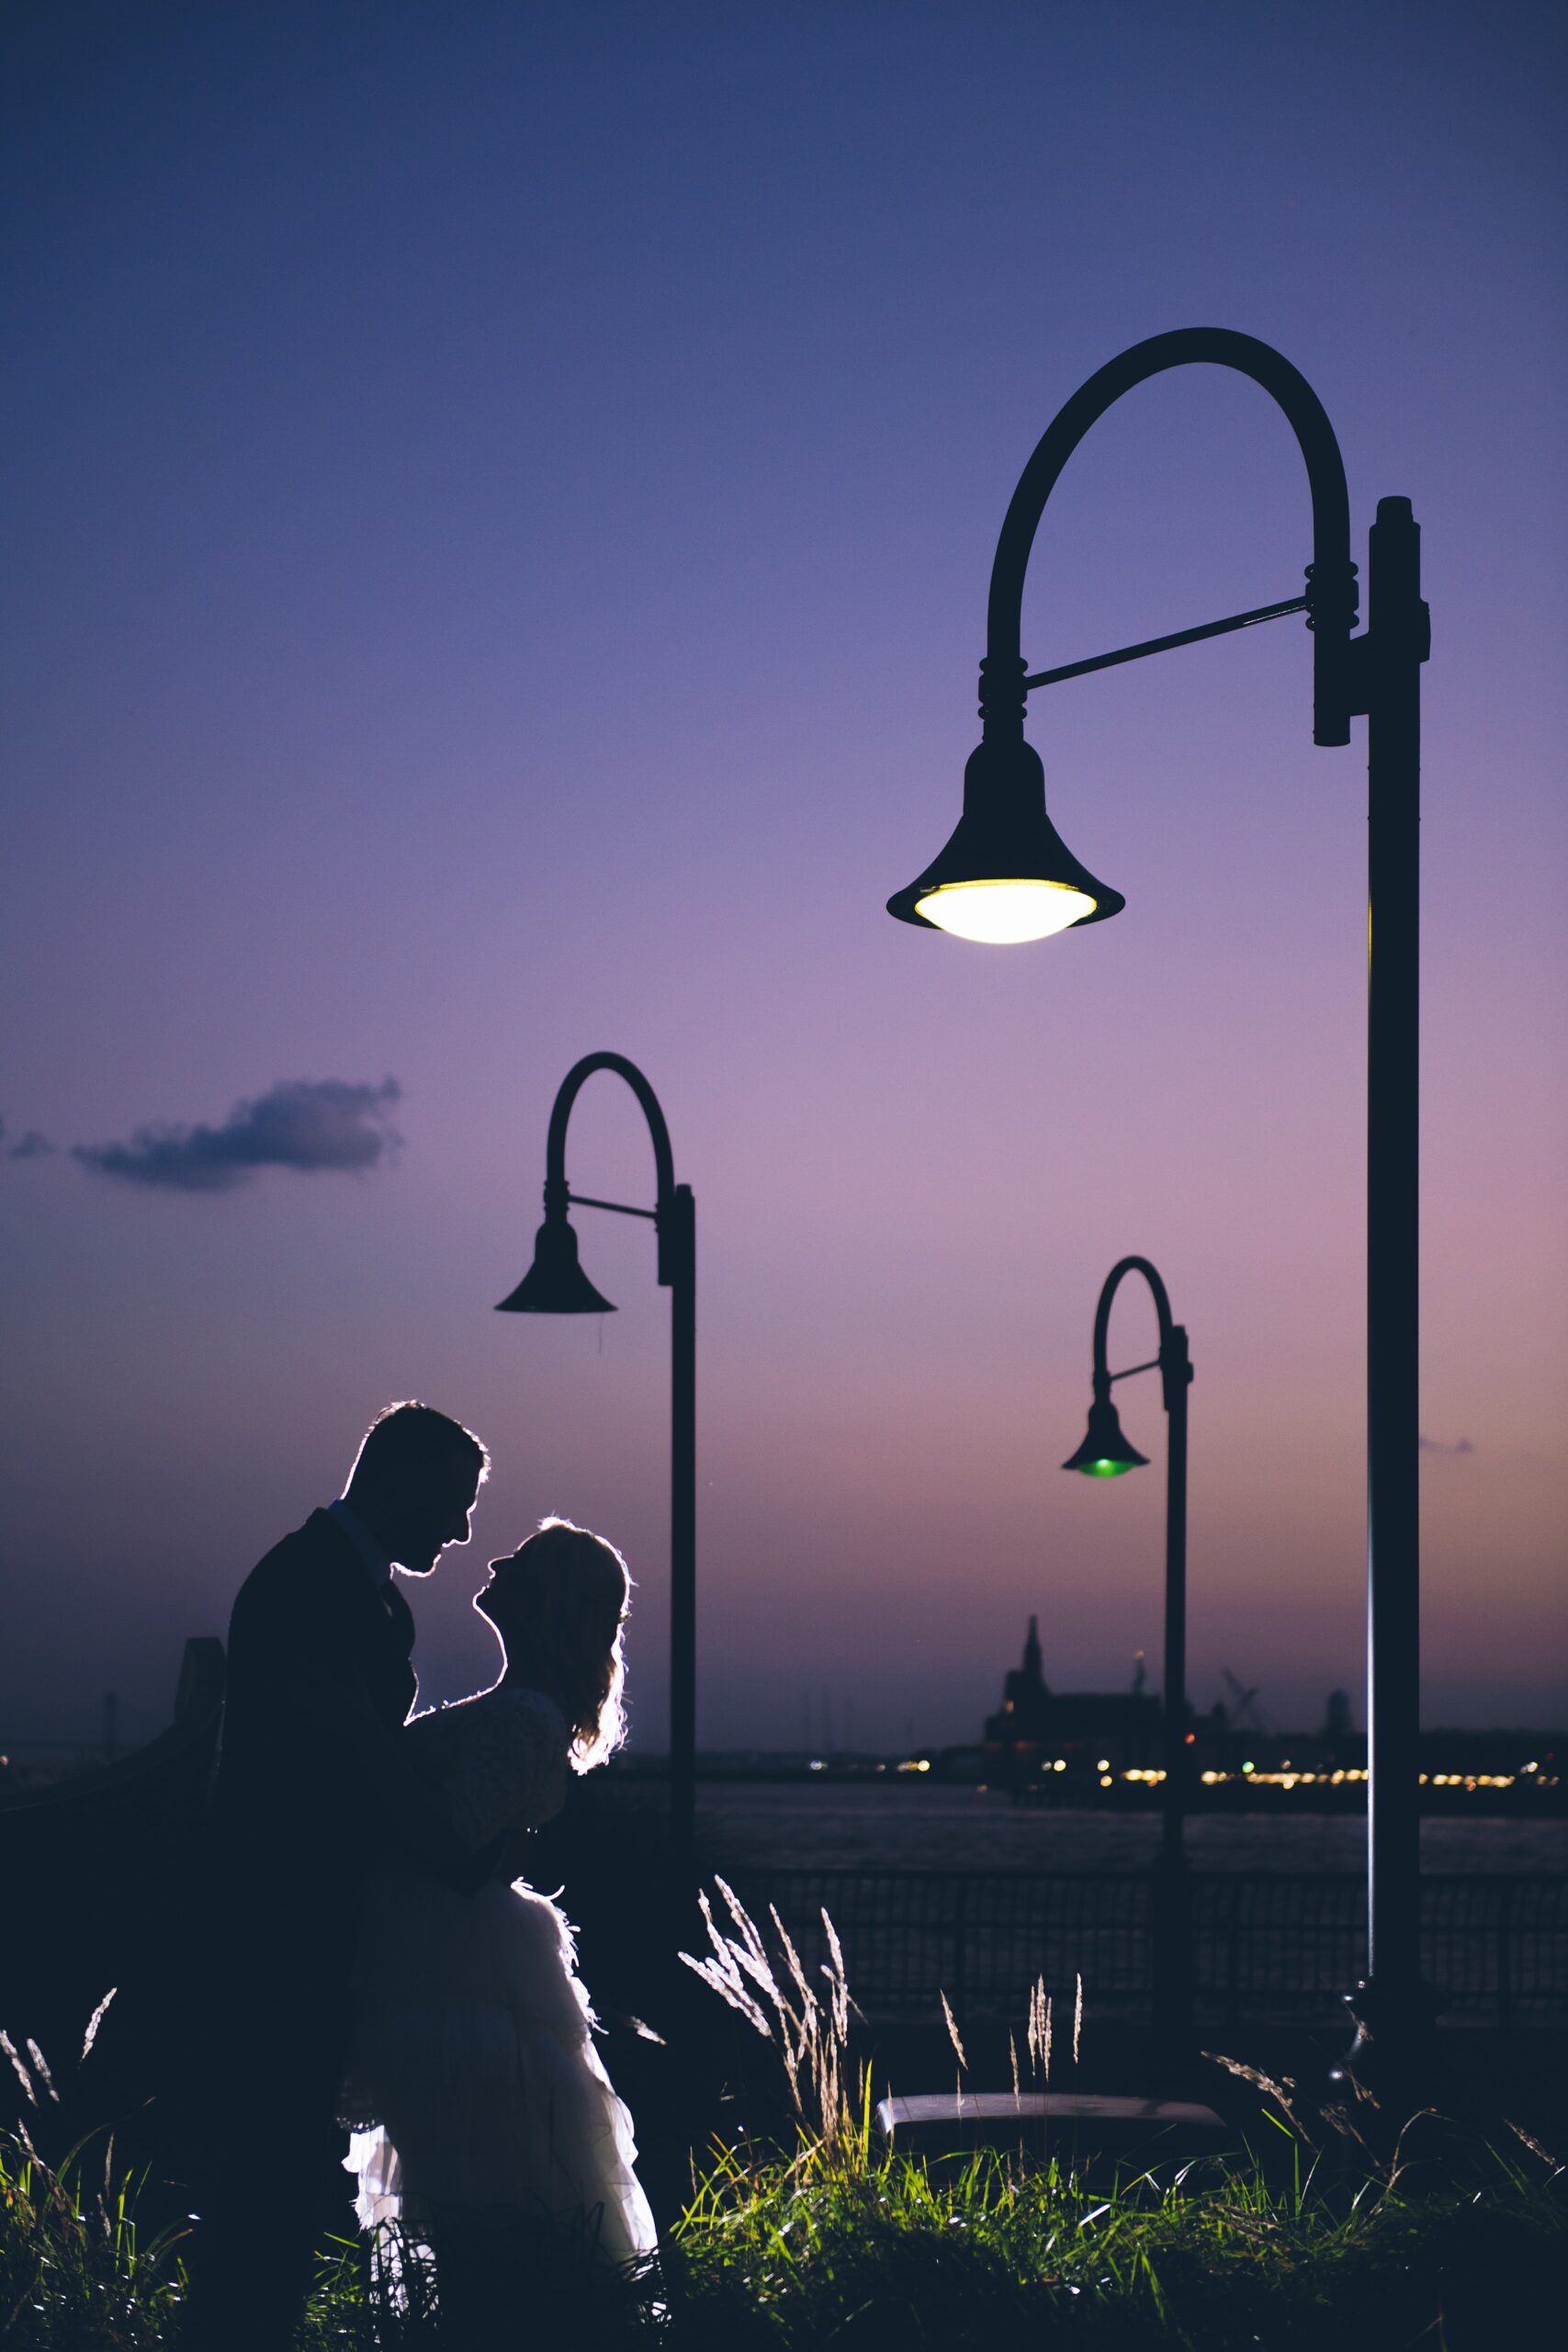 Jersey City Waterfront Elopement by Sascha Reinking Photography